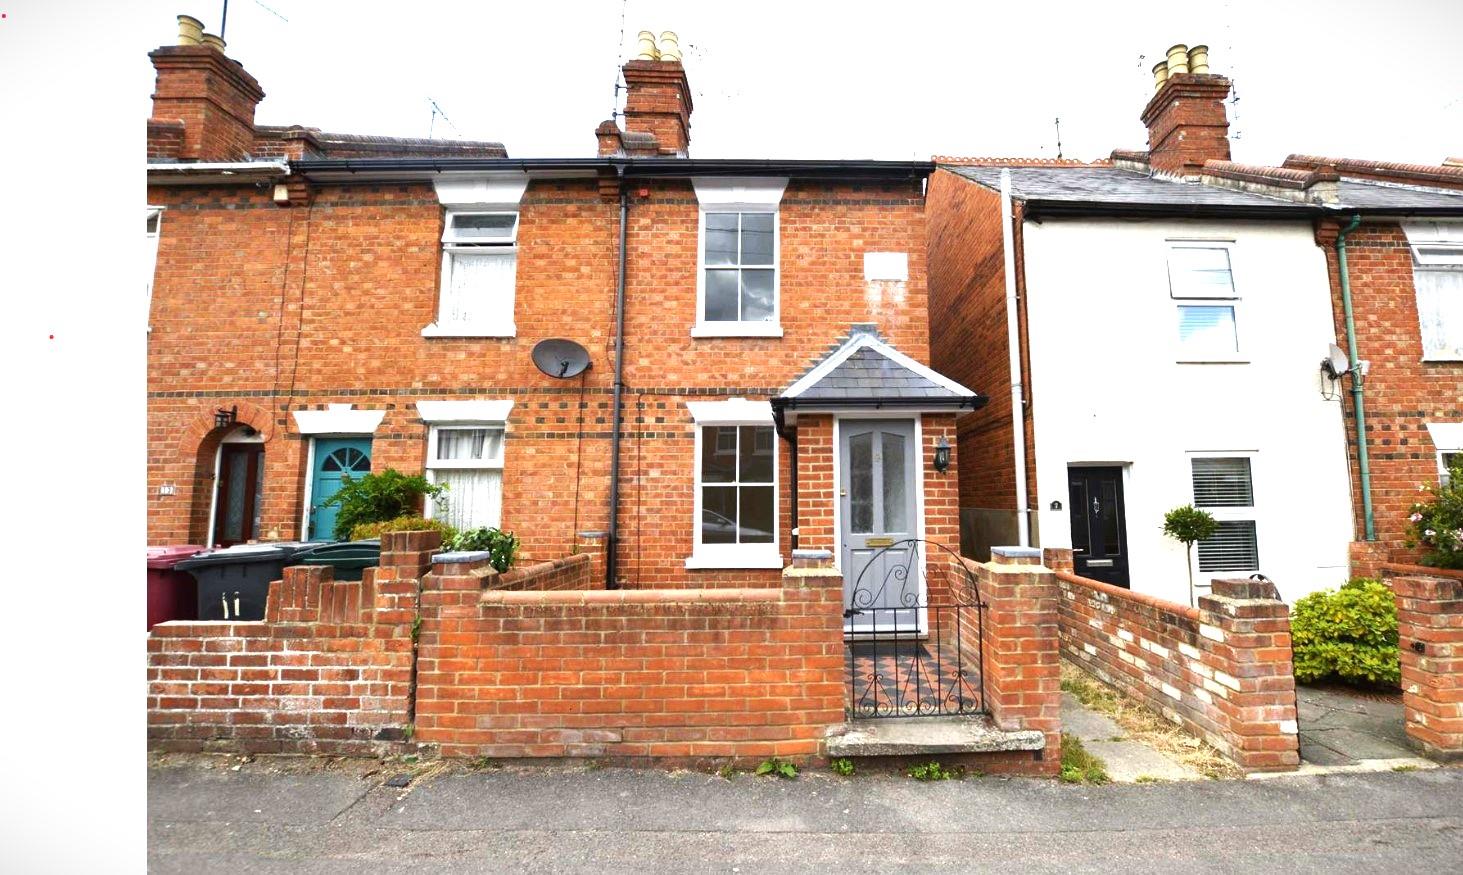 Queen Street Caversham house for sale in Reading